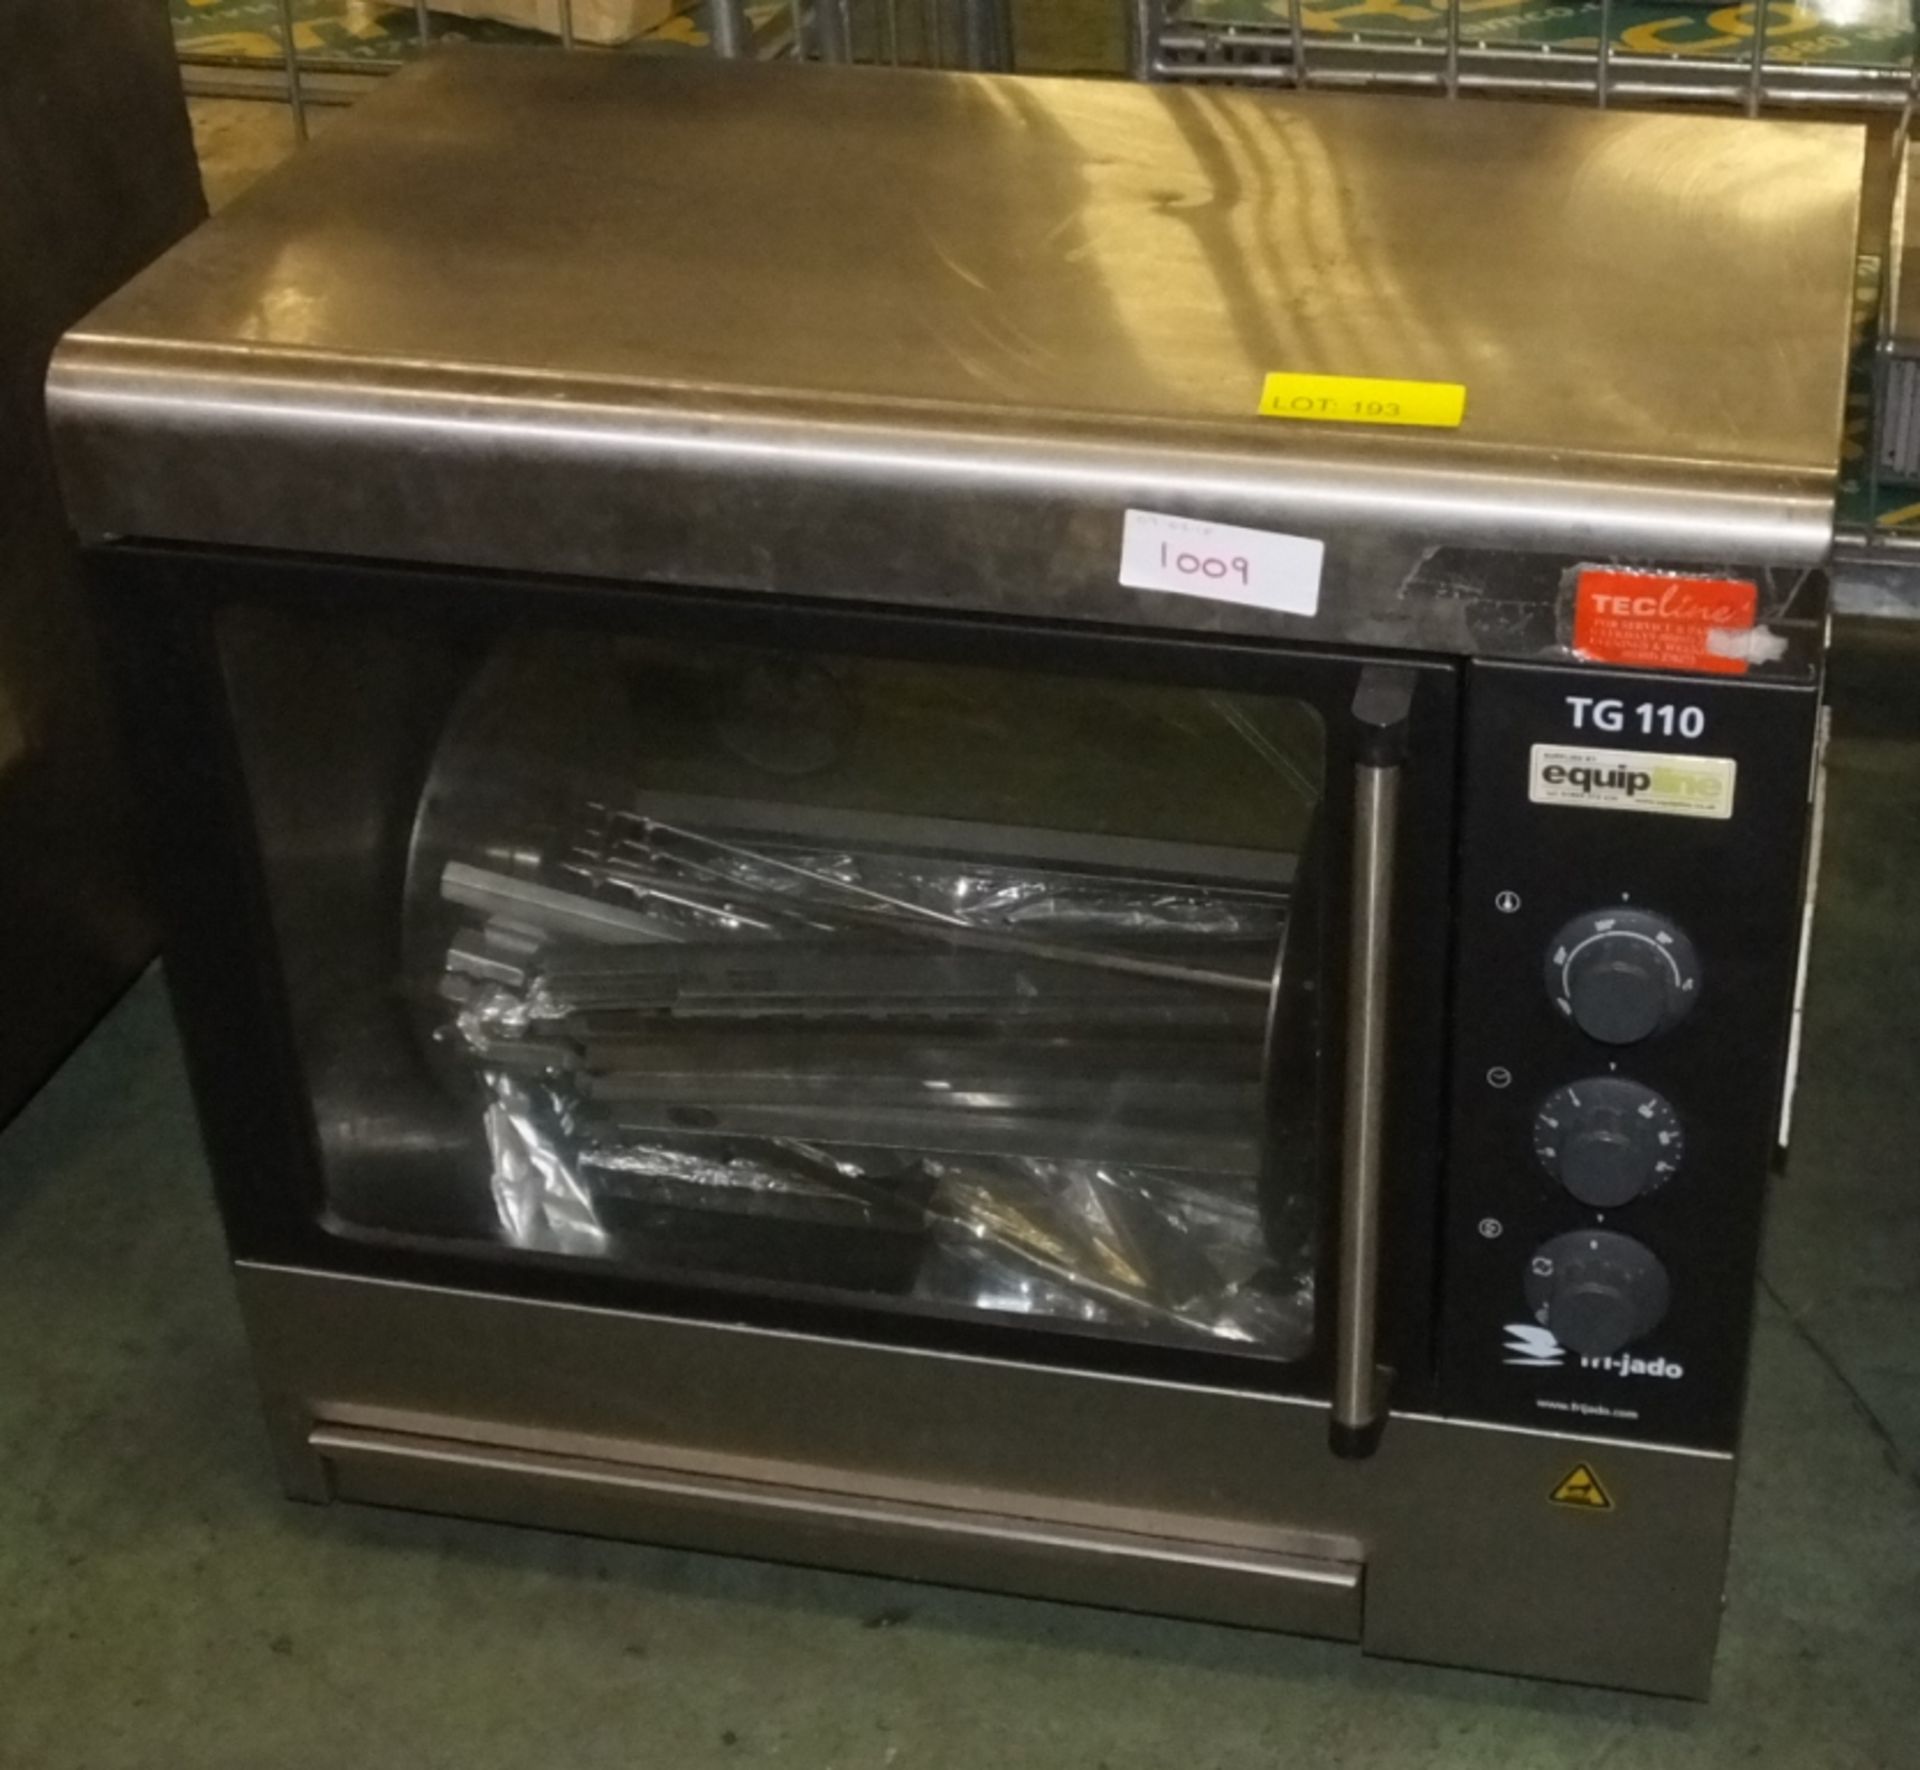 Rotisserie Oven (TF110-M) - Please note there will be a loading fee of £5 on this item